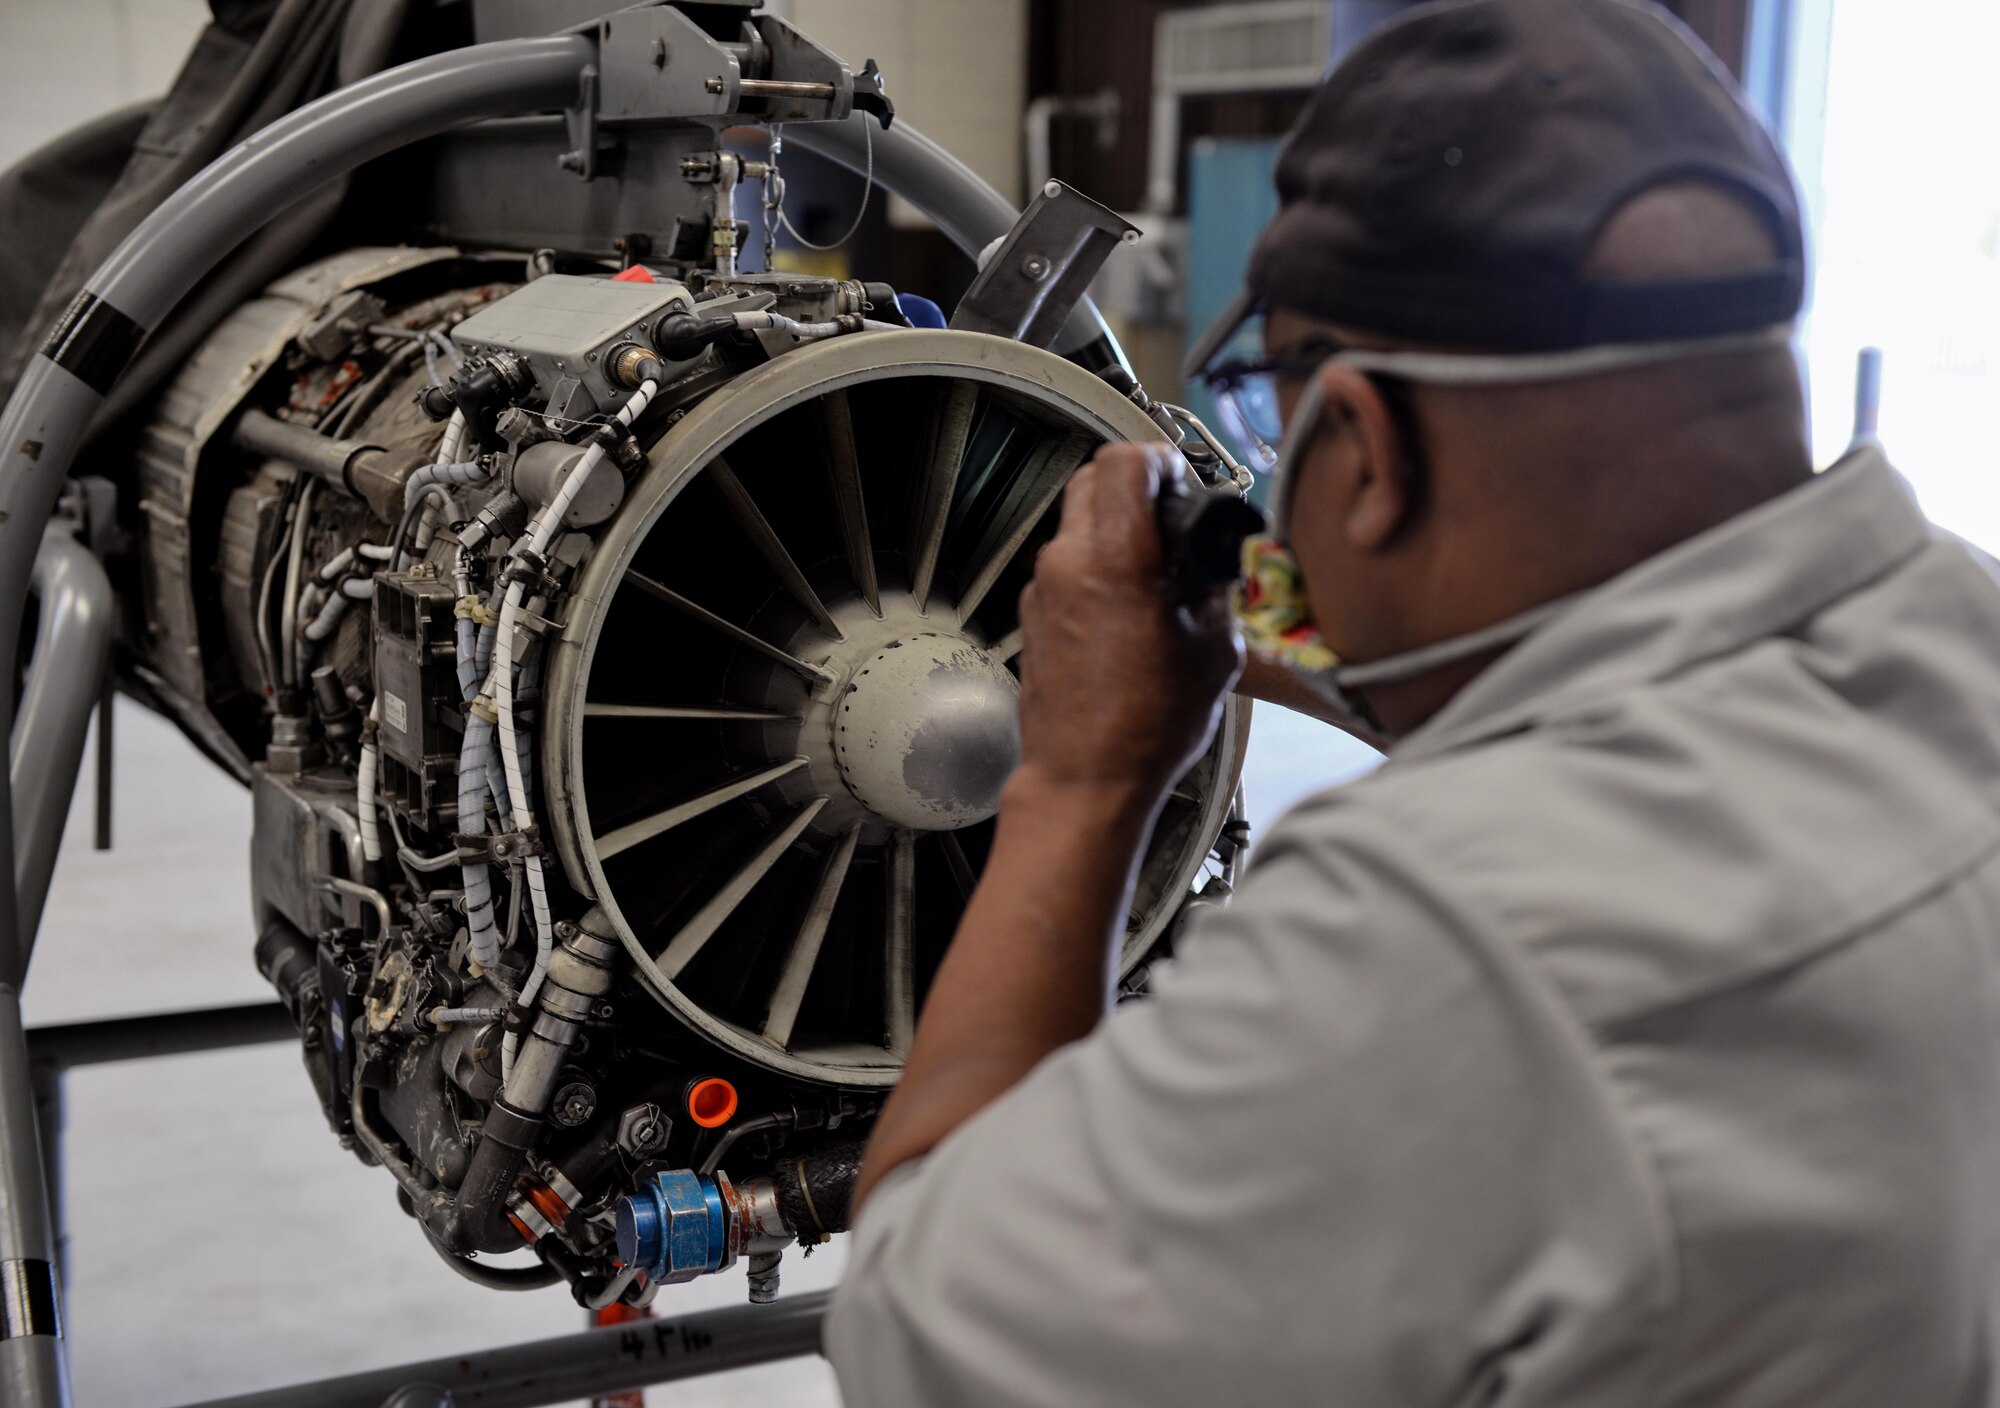 Willy Latham, M1 Support Services propulsion mechanic, inspects a General Electric J85-GE-5 turbojet engine, designed for a T-38 Talon April 17, 2020, at Columbus Air Force Base, Miss. The T-38 is a twin-engine, high-altitude, supersonic jet trainer used in a variety of roles because of its design, economy of operations, ease of maintenance, high performance and exceptional safety record. (U.S. Air Force photo by Airman 1st Class Davis Donaldson)